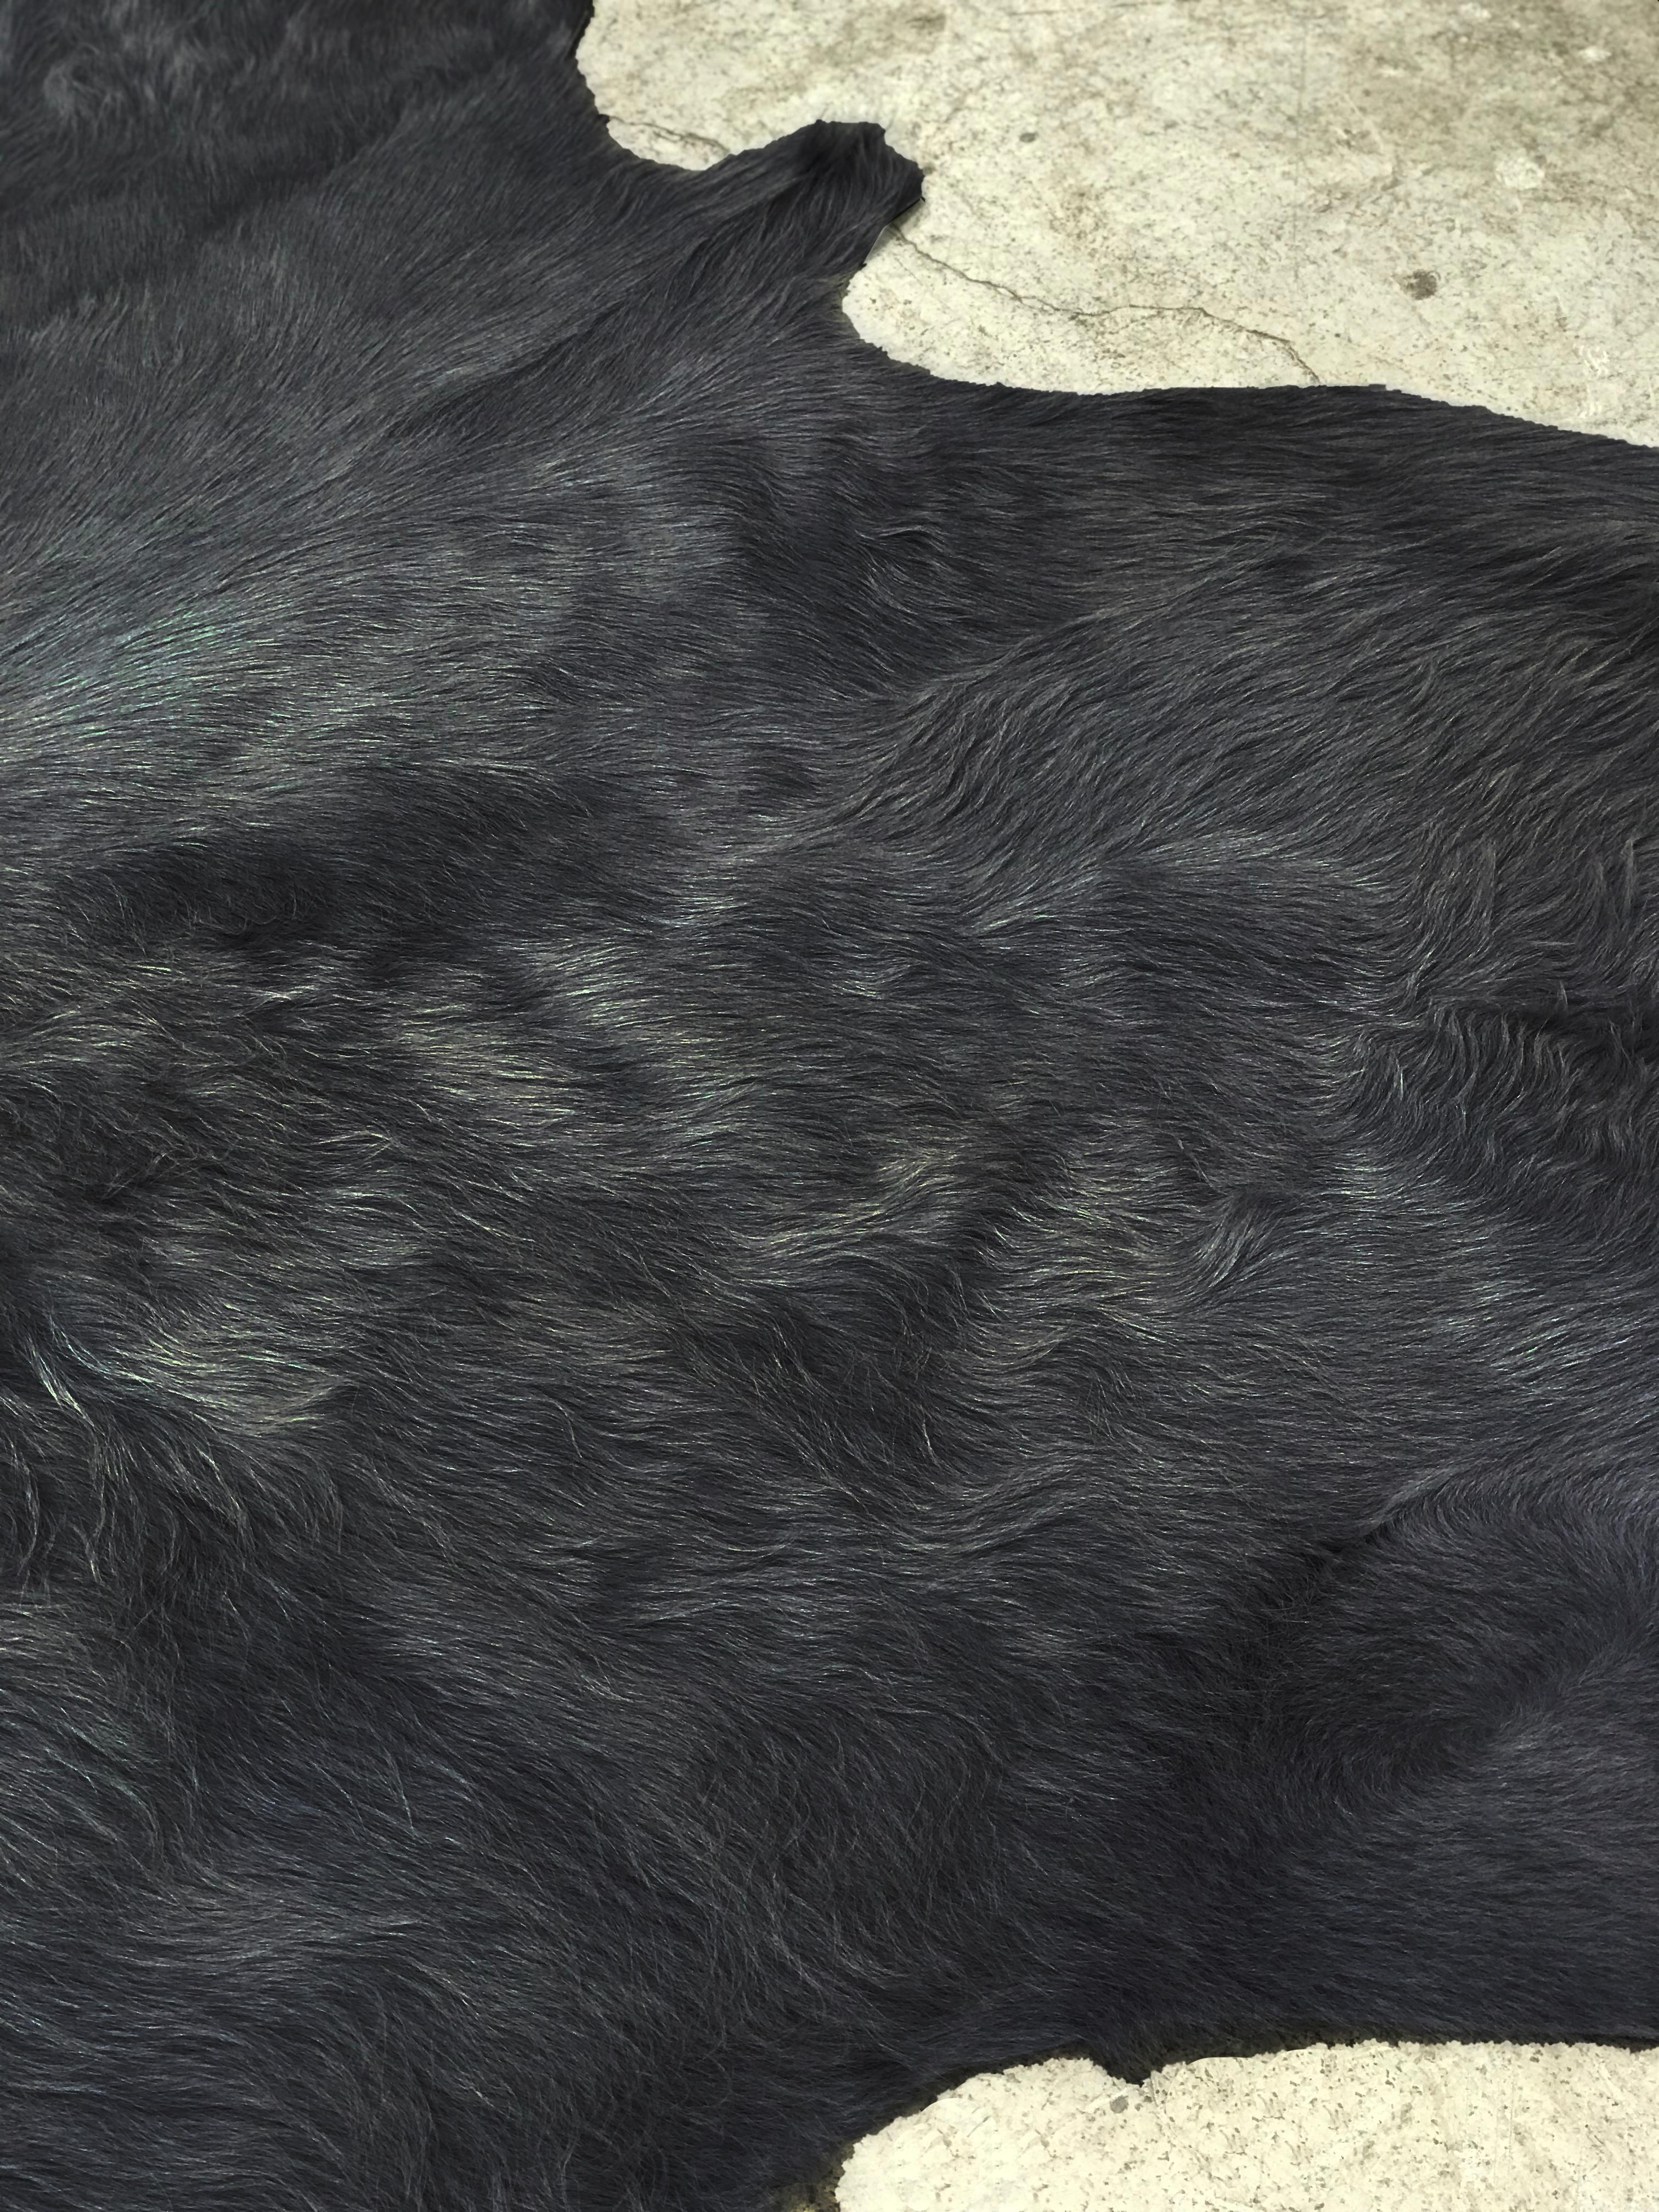 Italian Cowhide Rug, Black, Hand-Dyed, Sustainably Sourced, Variety of Colors For Sale